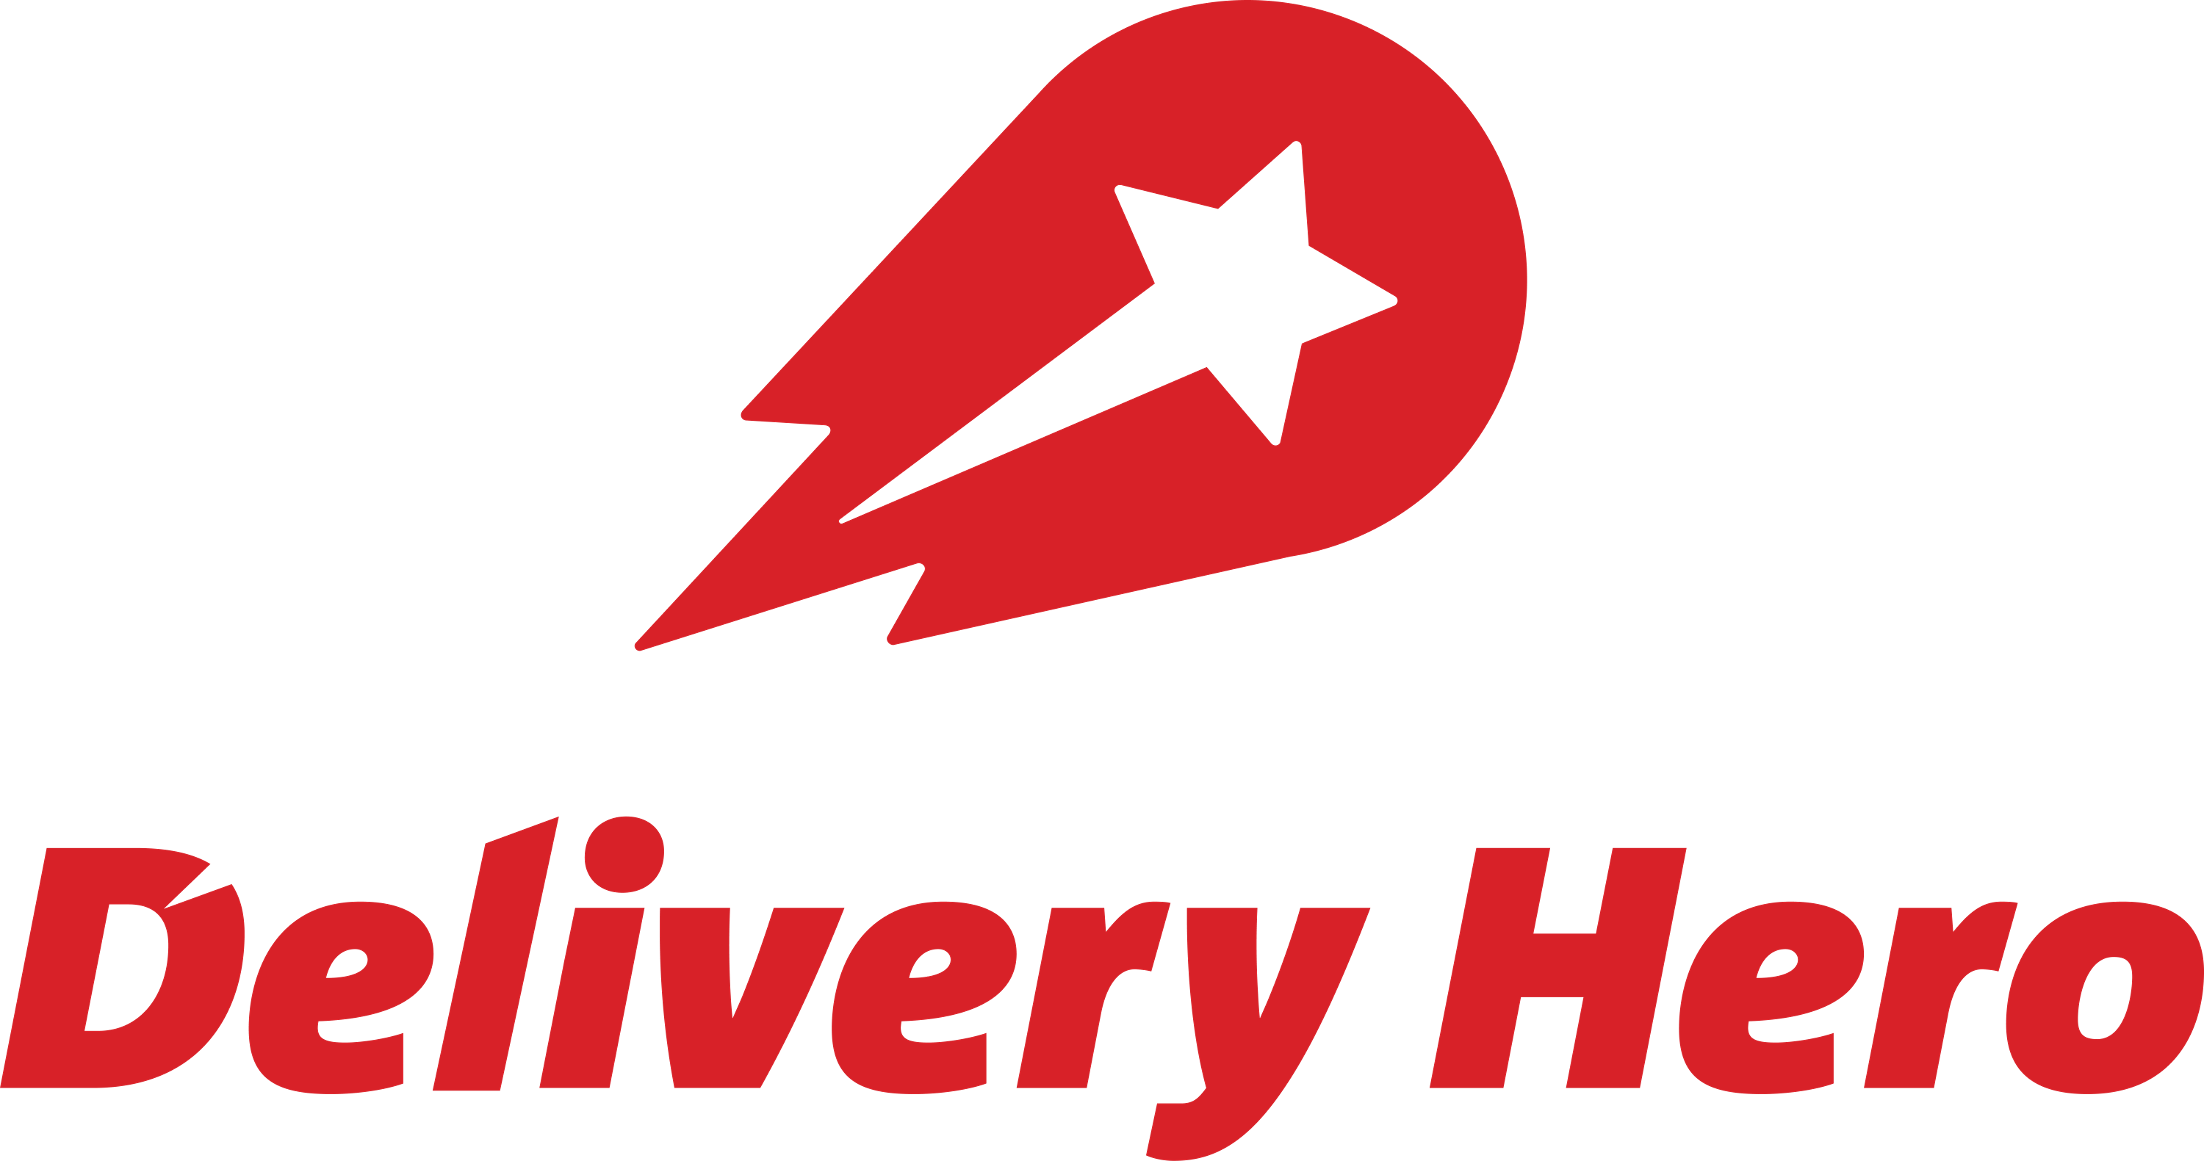 Delivery hero logo red